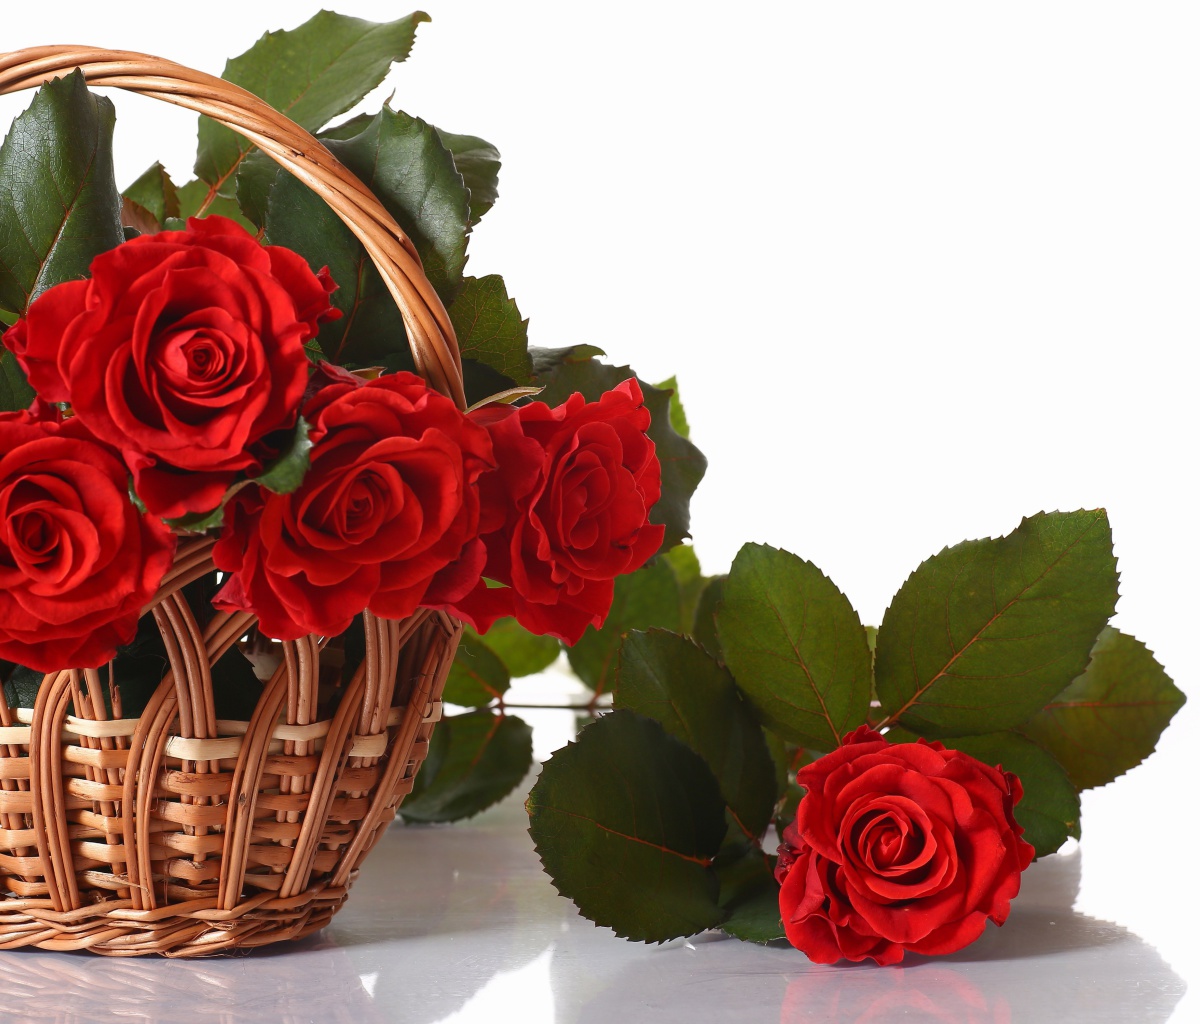 Basket with Roses wallpaper 1200x1024